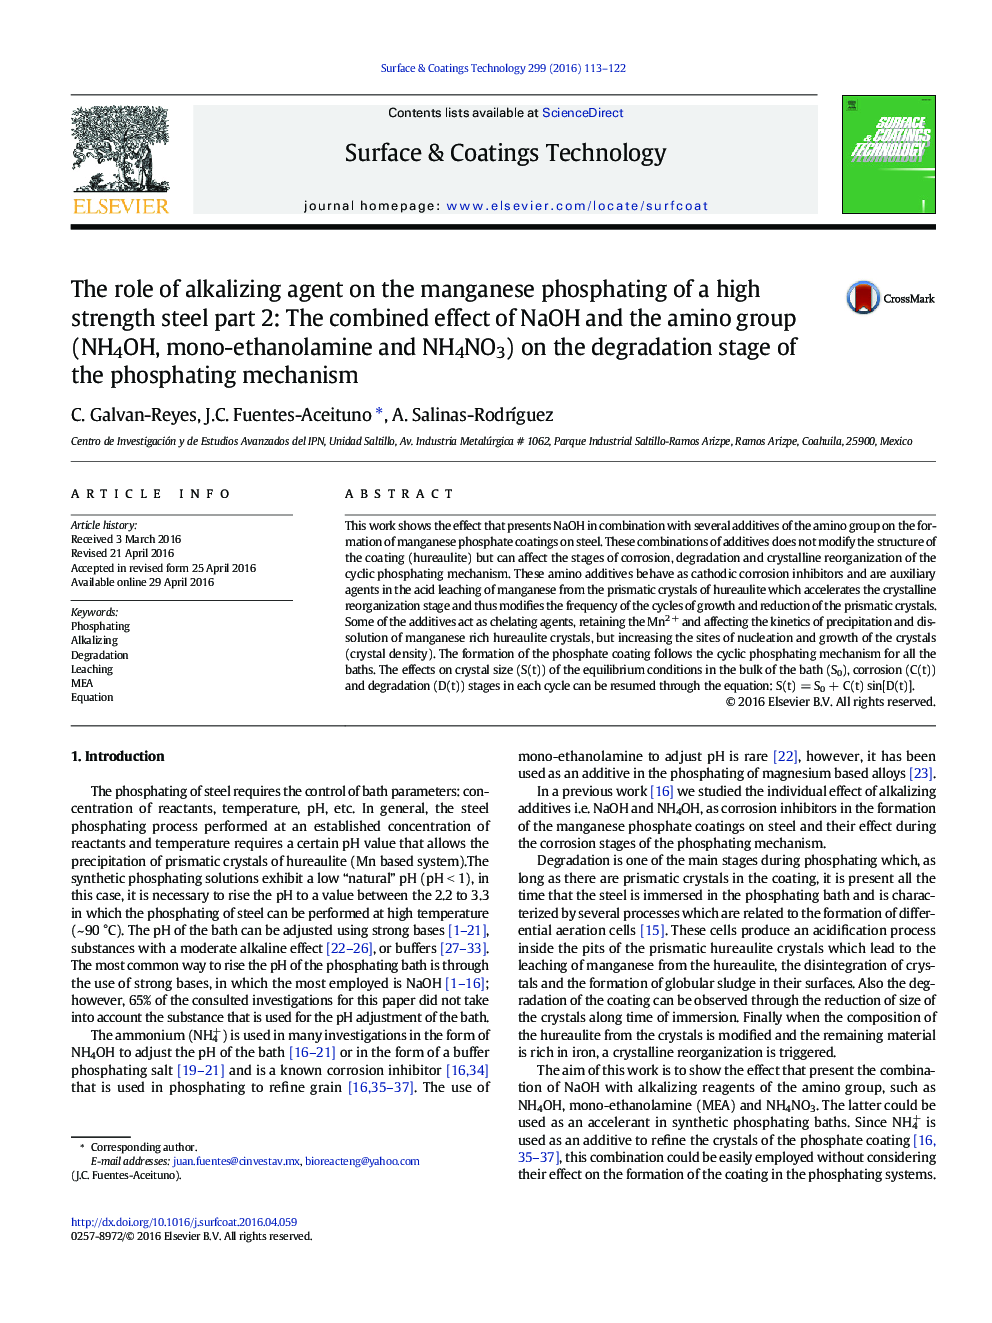 The role of alkalizing agent on the manganese phosphating of a high strength steel part 2: The combined effect of NaOH and the amino group (NH4OH, mono-ethanolamine and NH4NO3) on the degradation stage of the phosphating mechanism